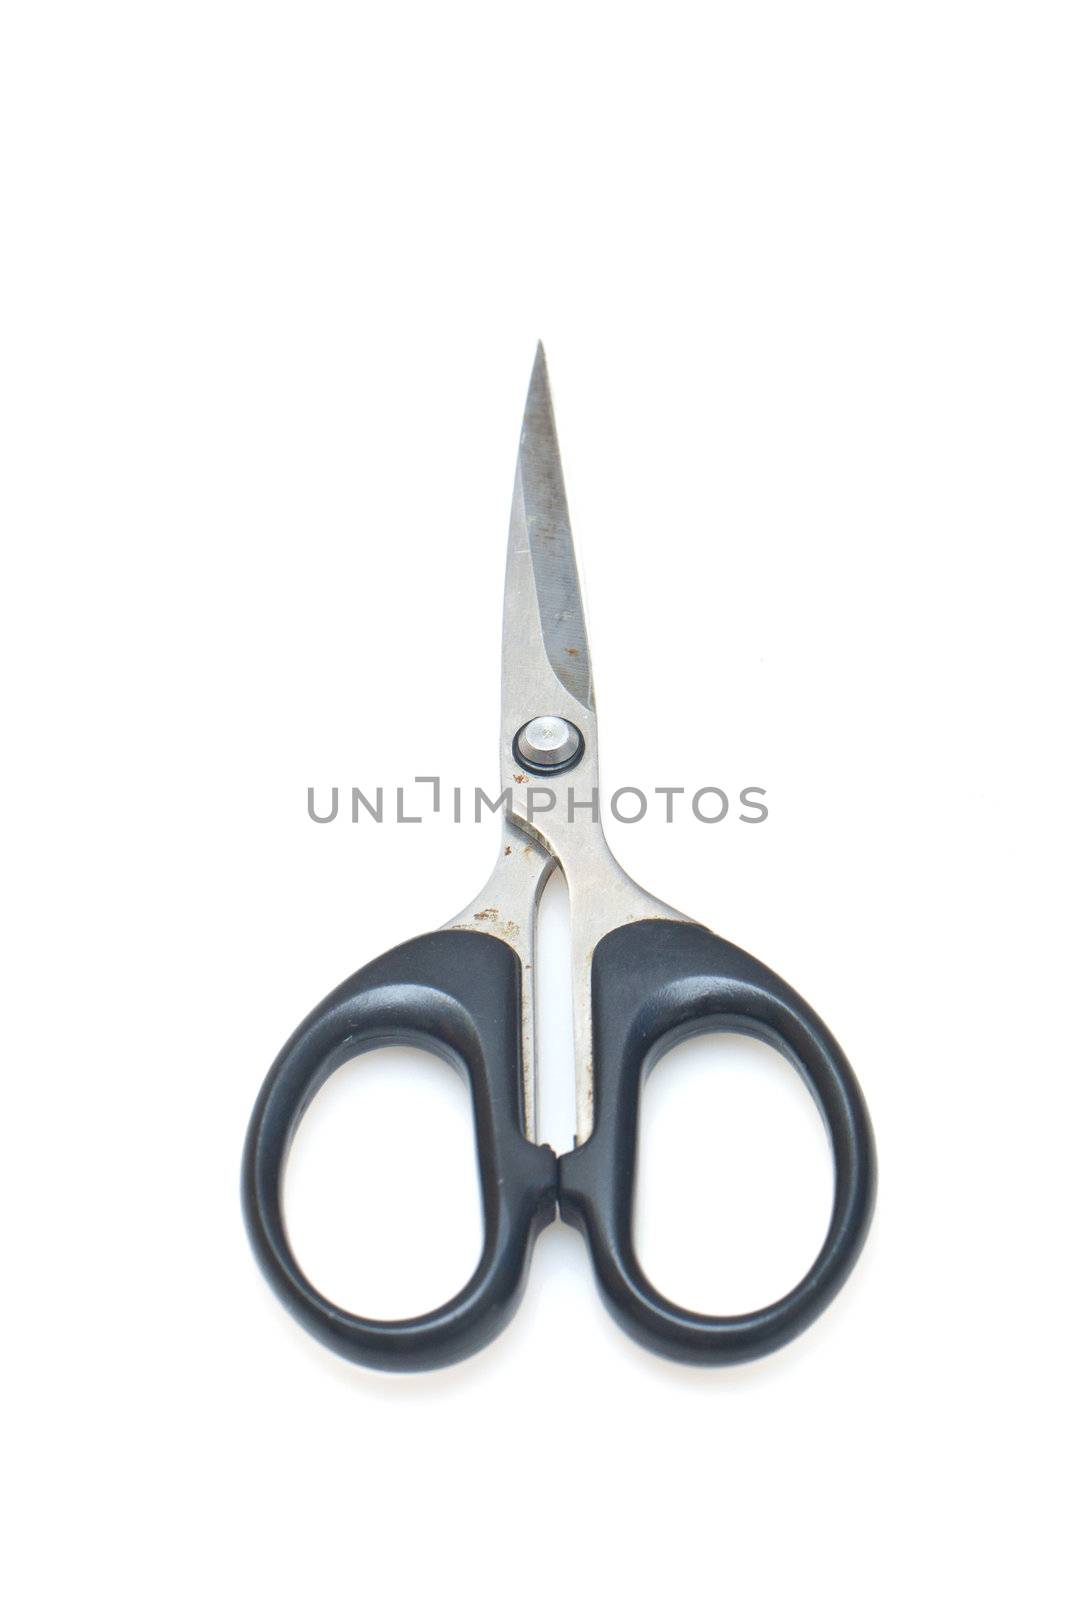 Rusted scissors isolated on white background